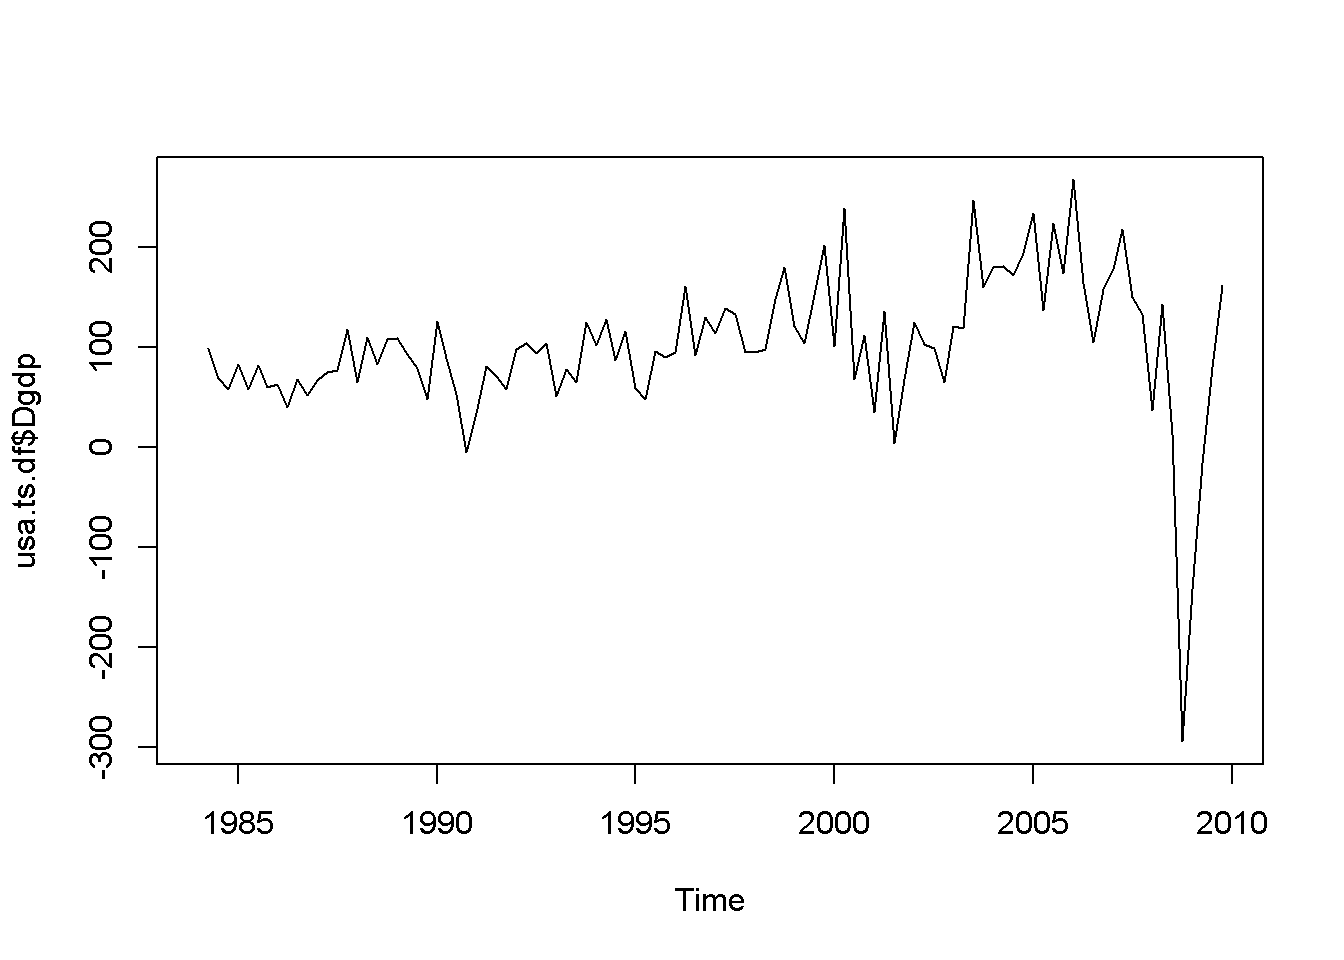 Various time series to illustrate nonstationarity